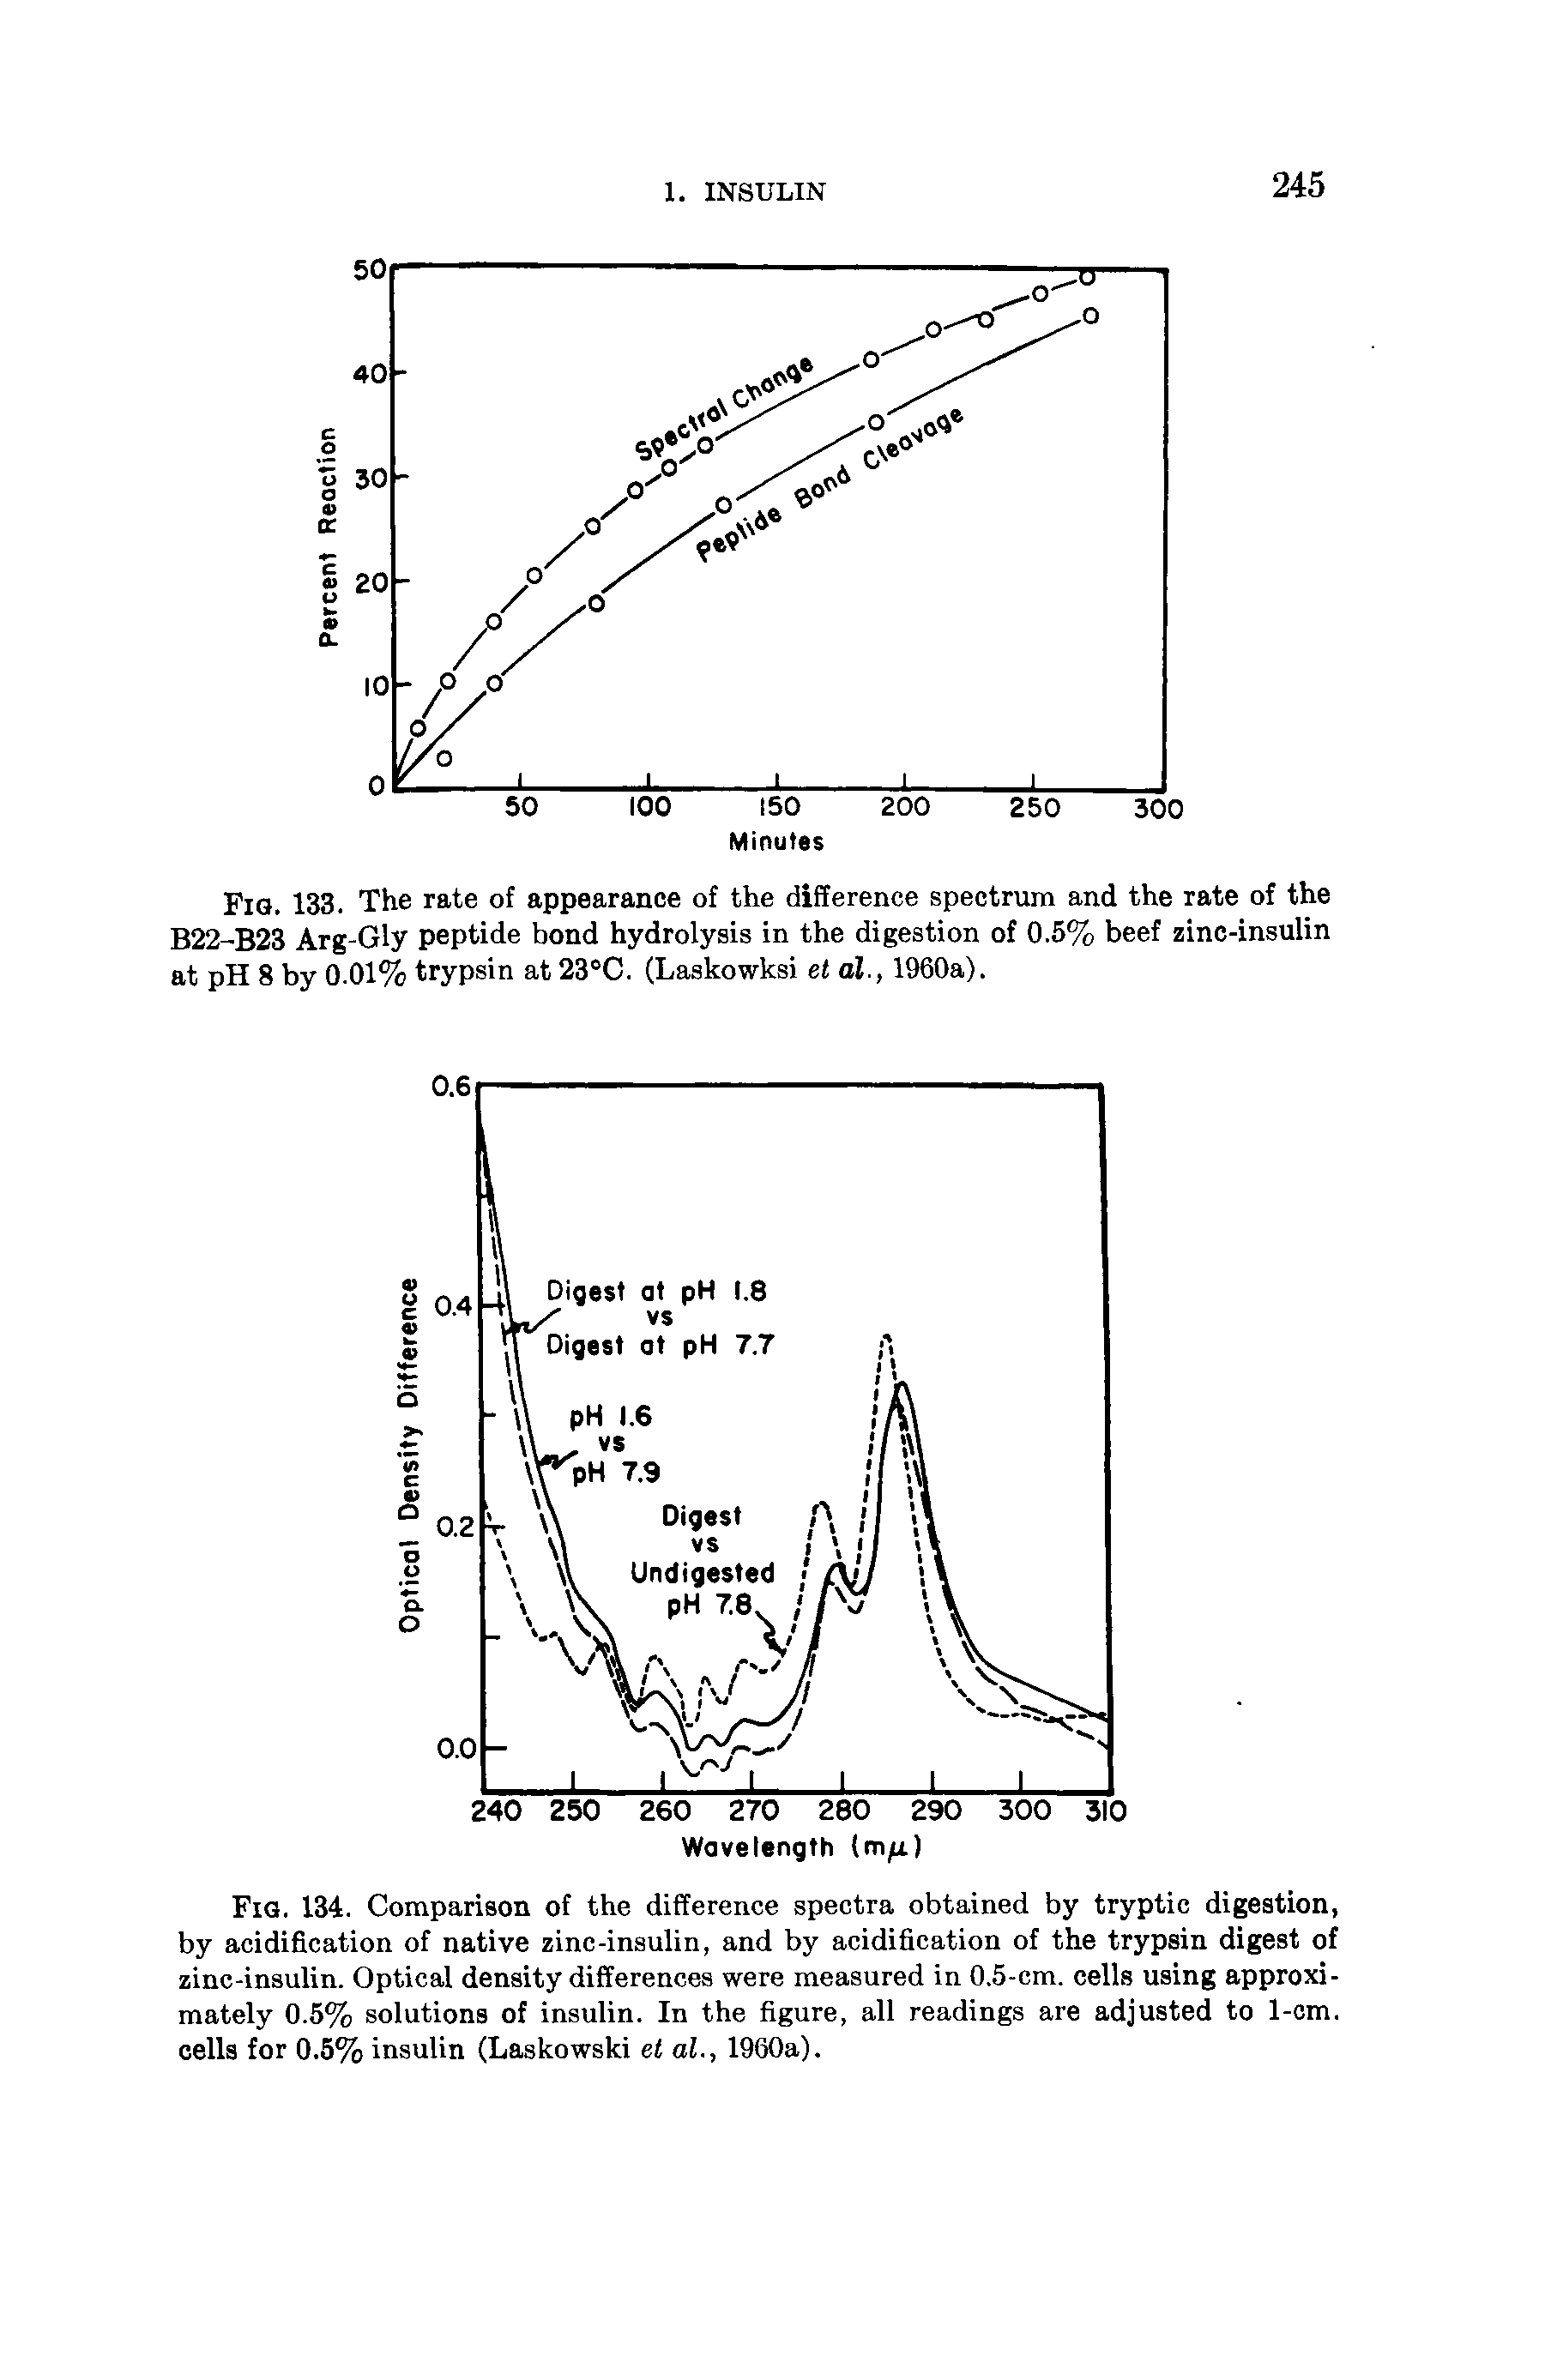 Fig. 134. Comparison of the difference spectra obtained by tryptic digestion, by acidification of native zinc-insulin, and by acidification of the trypsin digest of zinc-insulin. Optical density differences were measured in 0.5-cm. cells using approximately 0.5% solutions of insulin. In the figure, all readings are adjusted to 1-om. cells for 0.5% insulin (Laskowski e< al., 1960a).